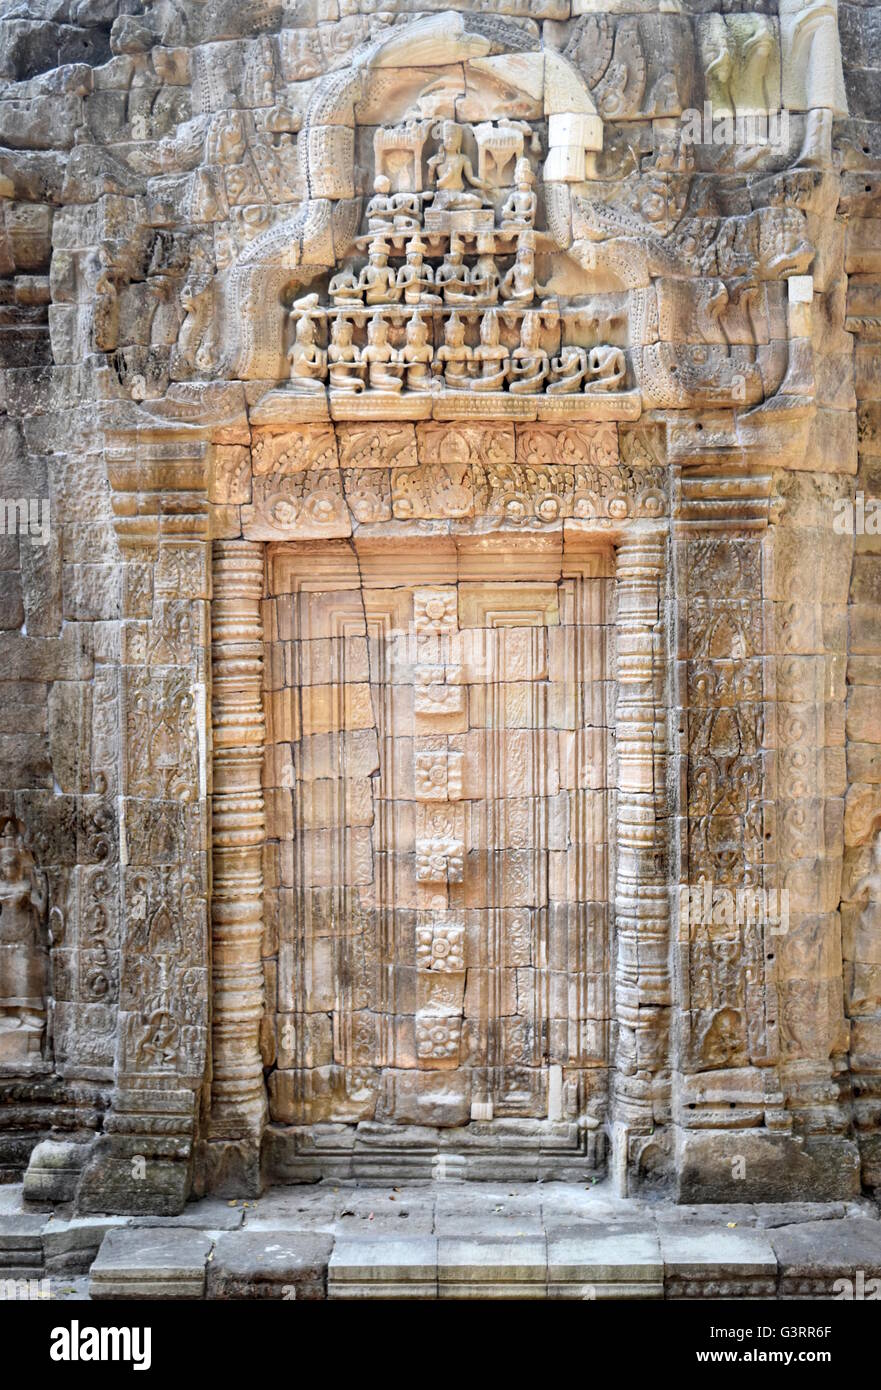 Stone gate - Entrance door carved on Ta Prohm ancient Buddhist temple - Cambodia Stock Photo